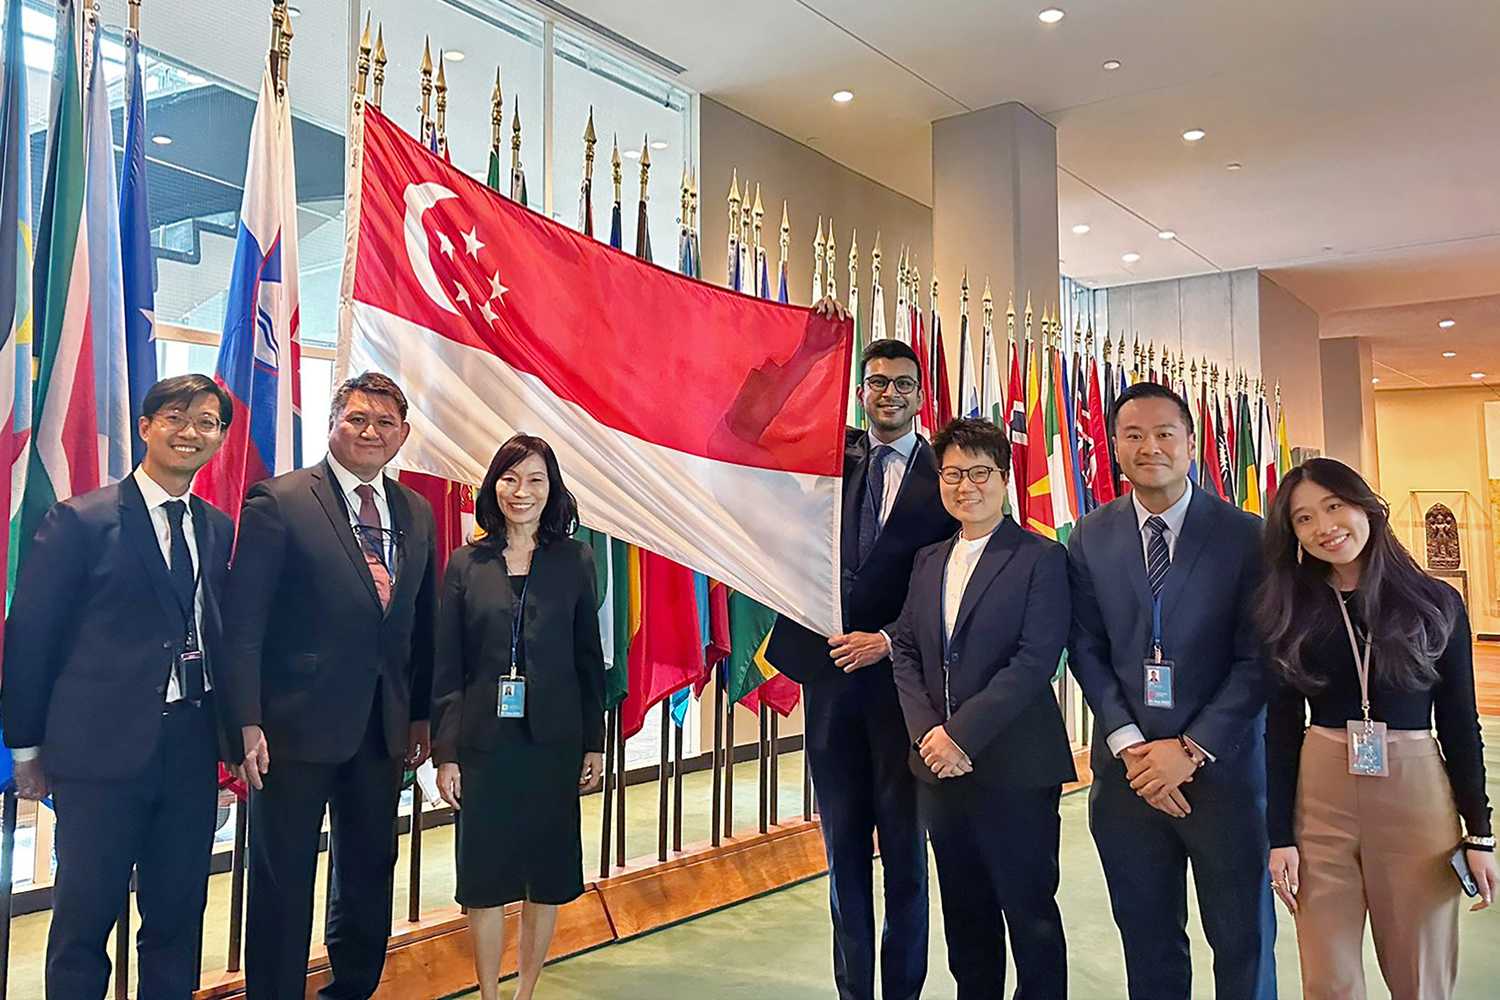 group of officers wearing formal attire, with blazer, carrying a singapore flag in the middle